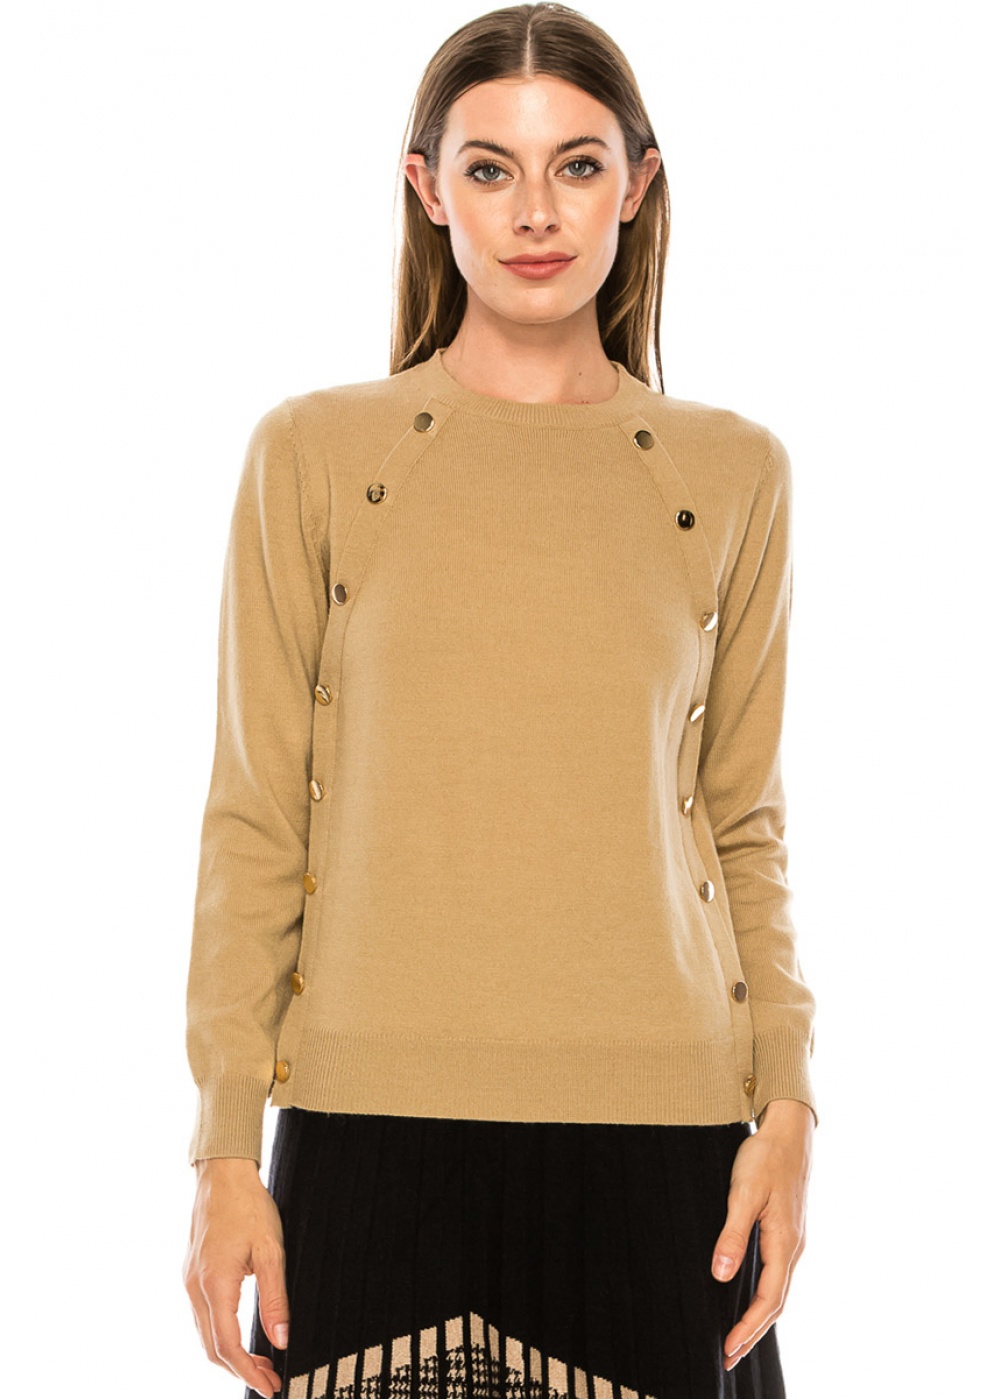 Beige sweater with two rows button decor